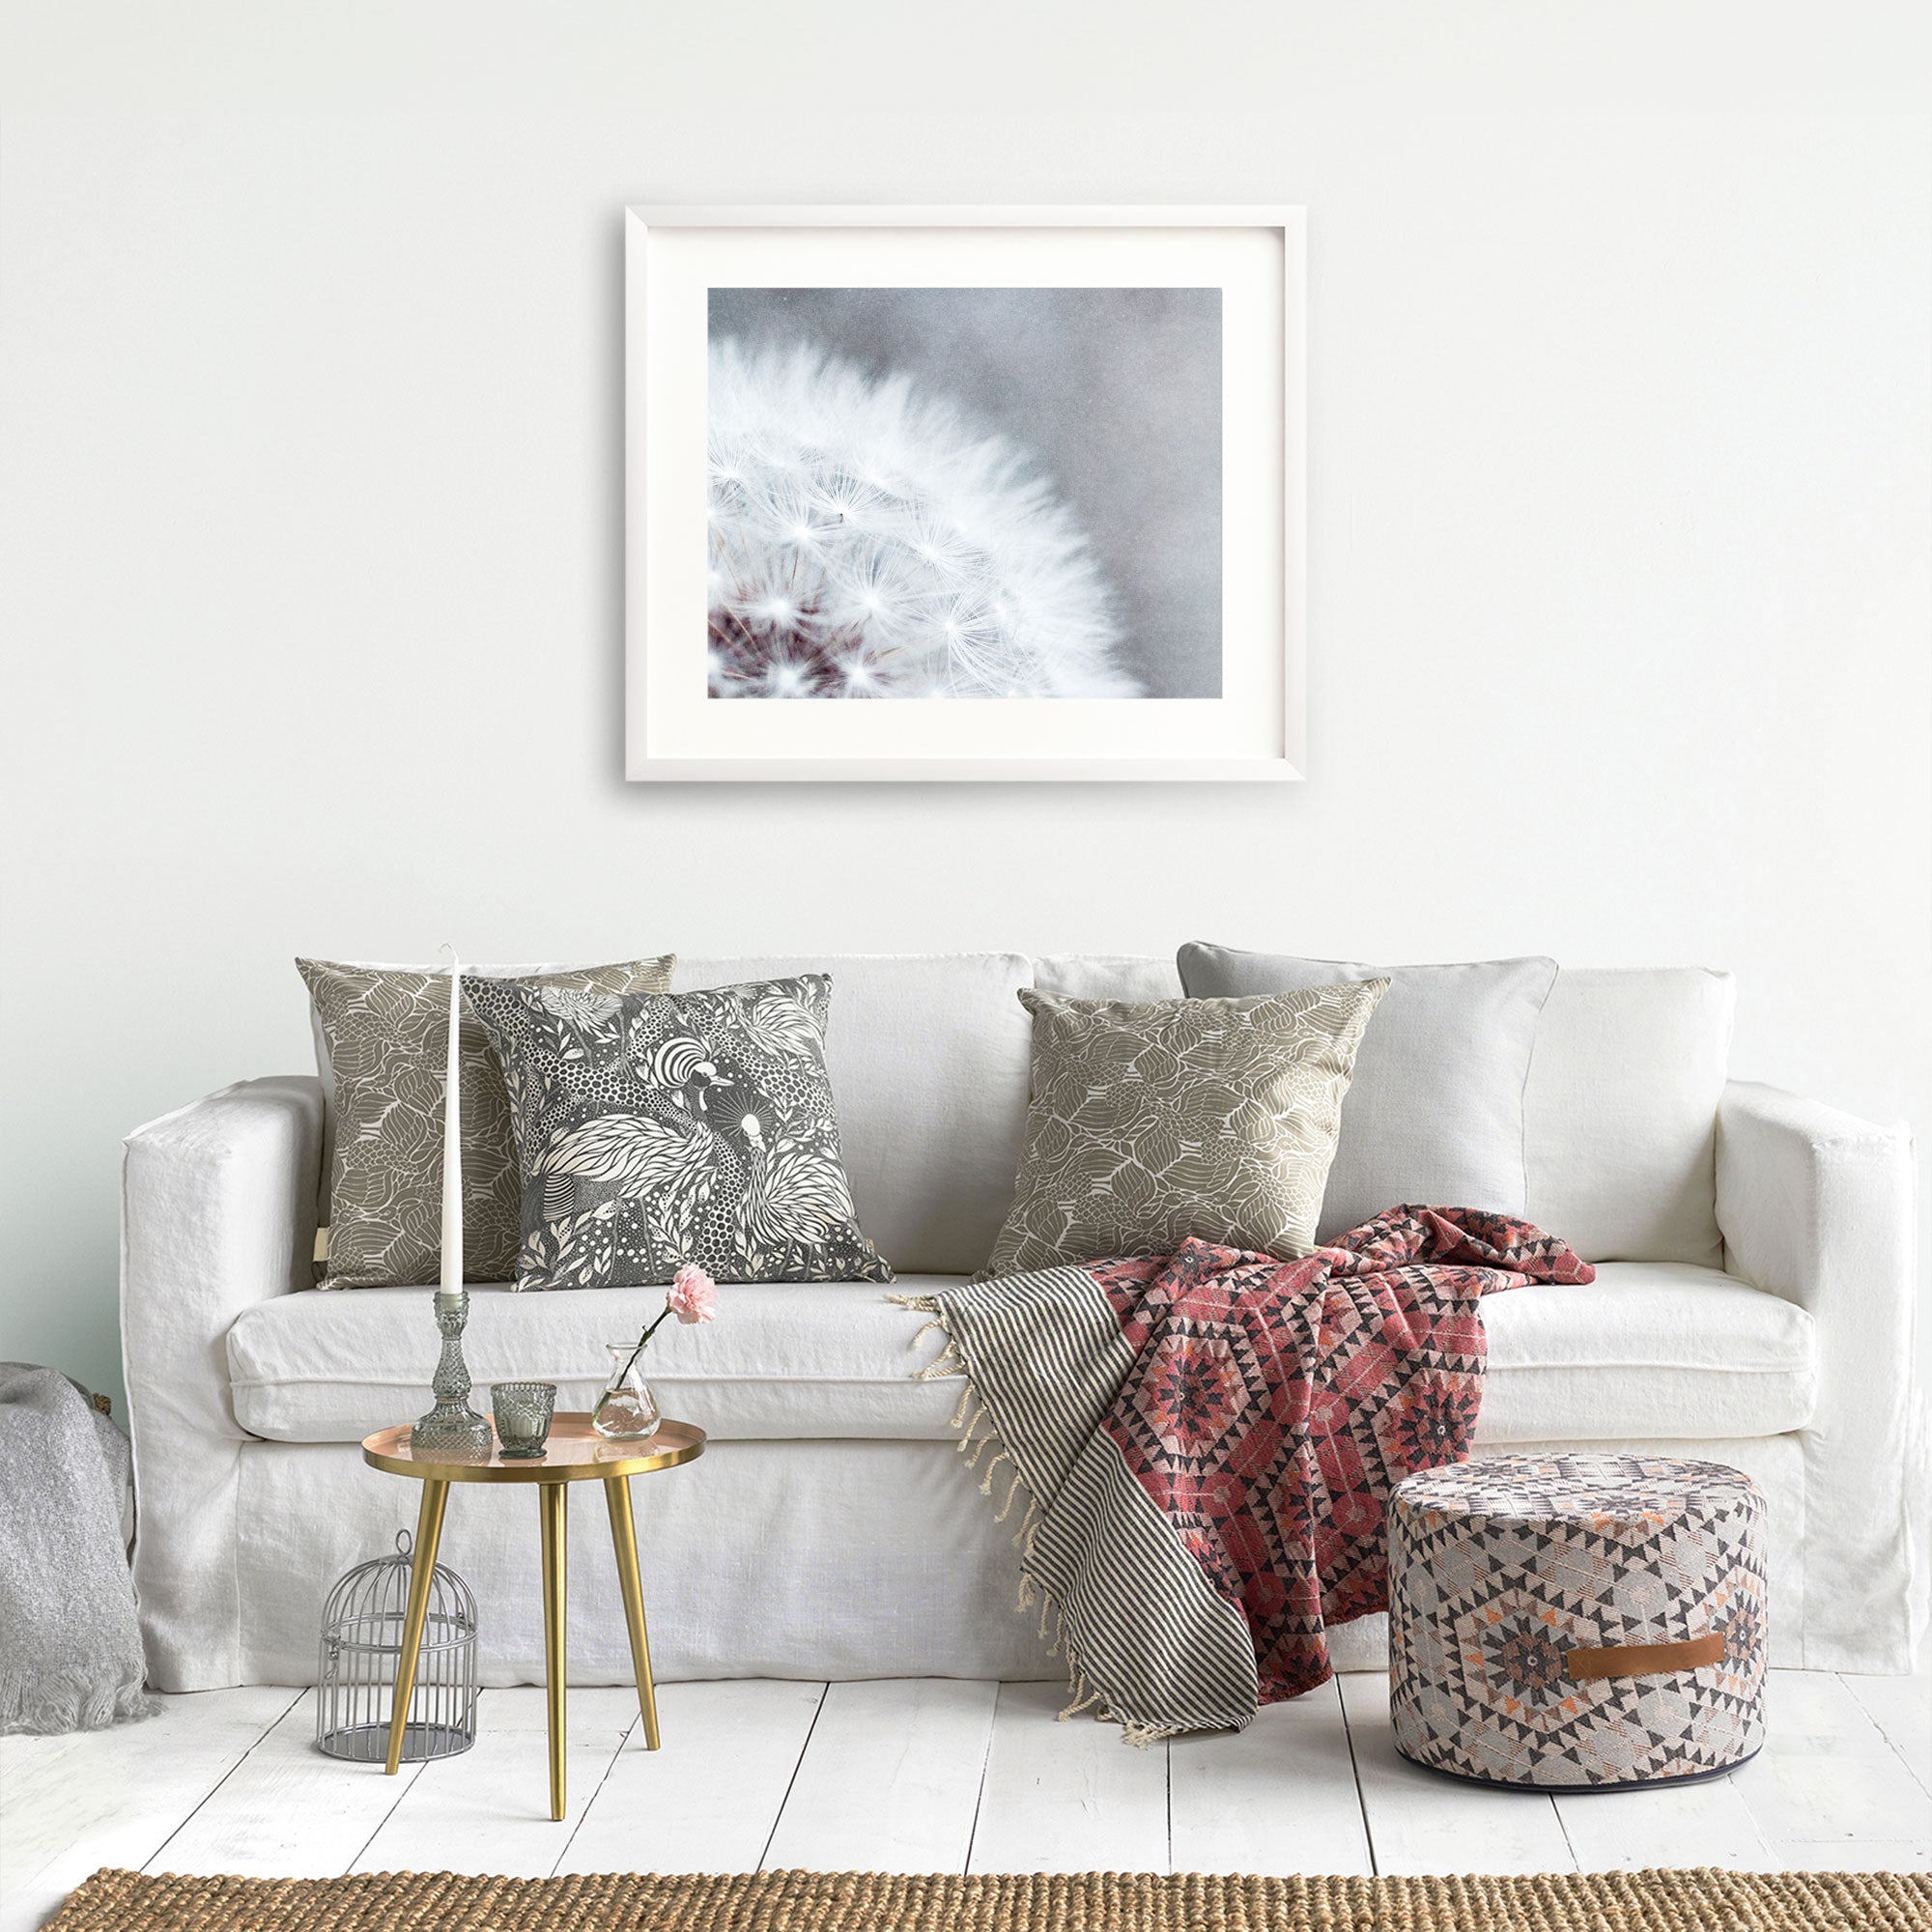 A cozy, inviting living room nook features a white sofa covered with decorative gray and beige pillows, a patterned red blanket, a small round table with books, flowers, and an Offley Green Grey Botanical Print, &#39;Dandelion Queen&#39;.